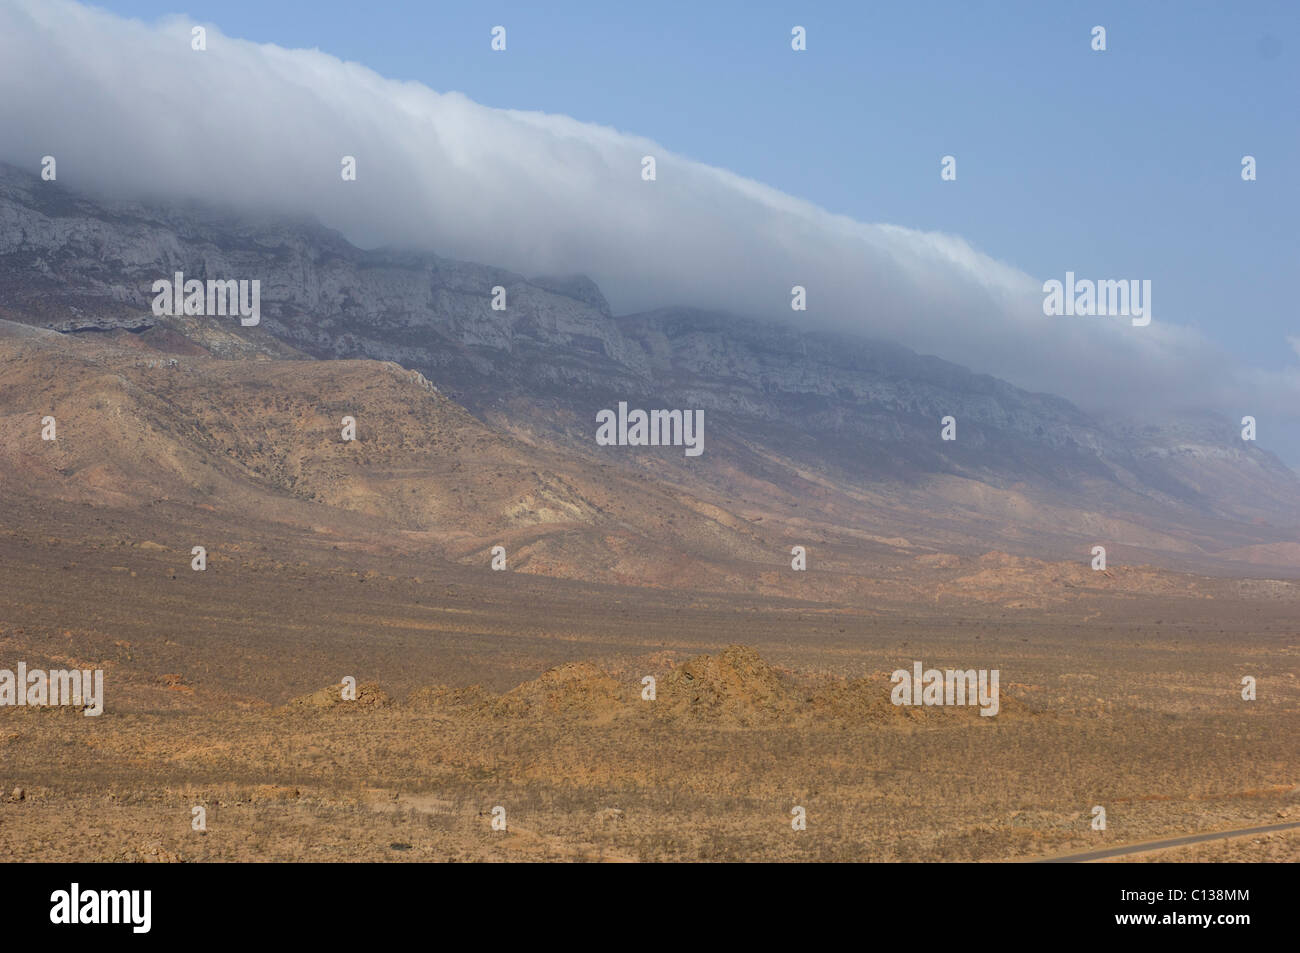 Clouds hanging over the cliffs of the central plateau near Qulansiyah, Socotra, Yemen Stock Photo